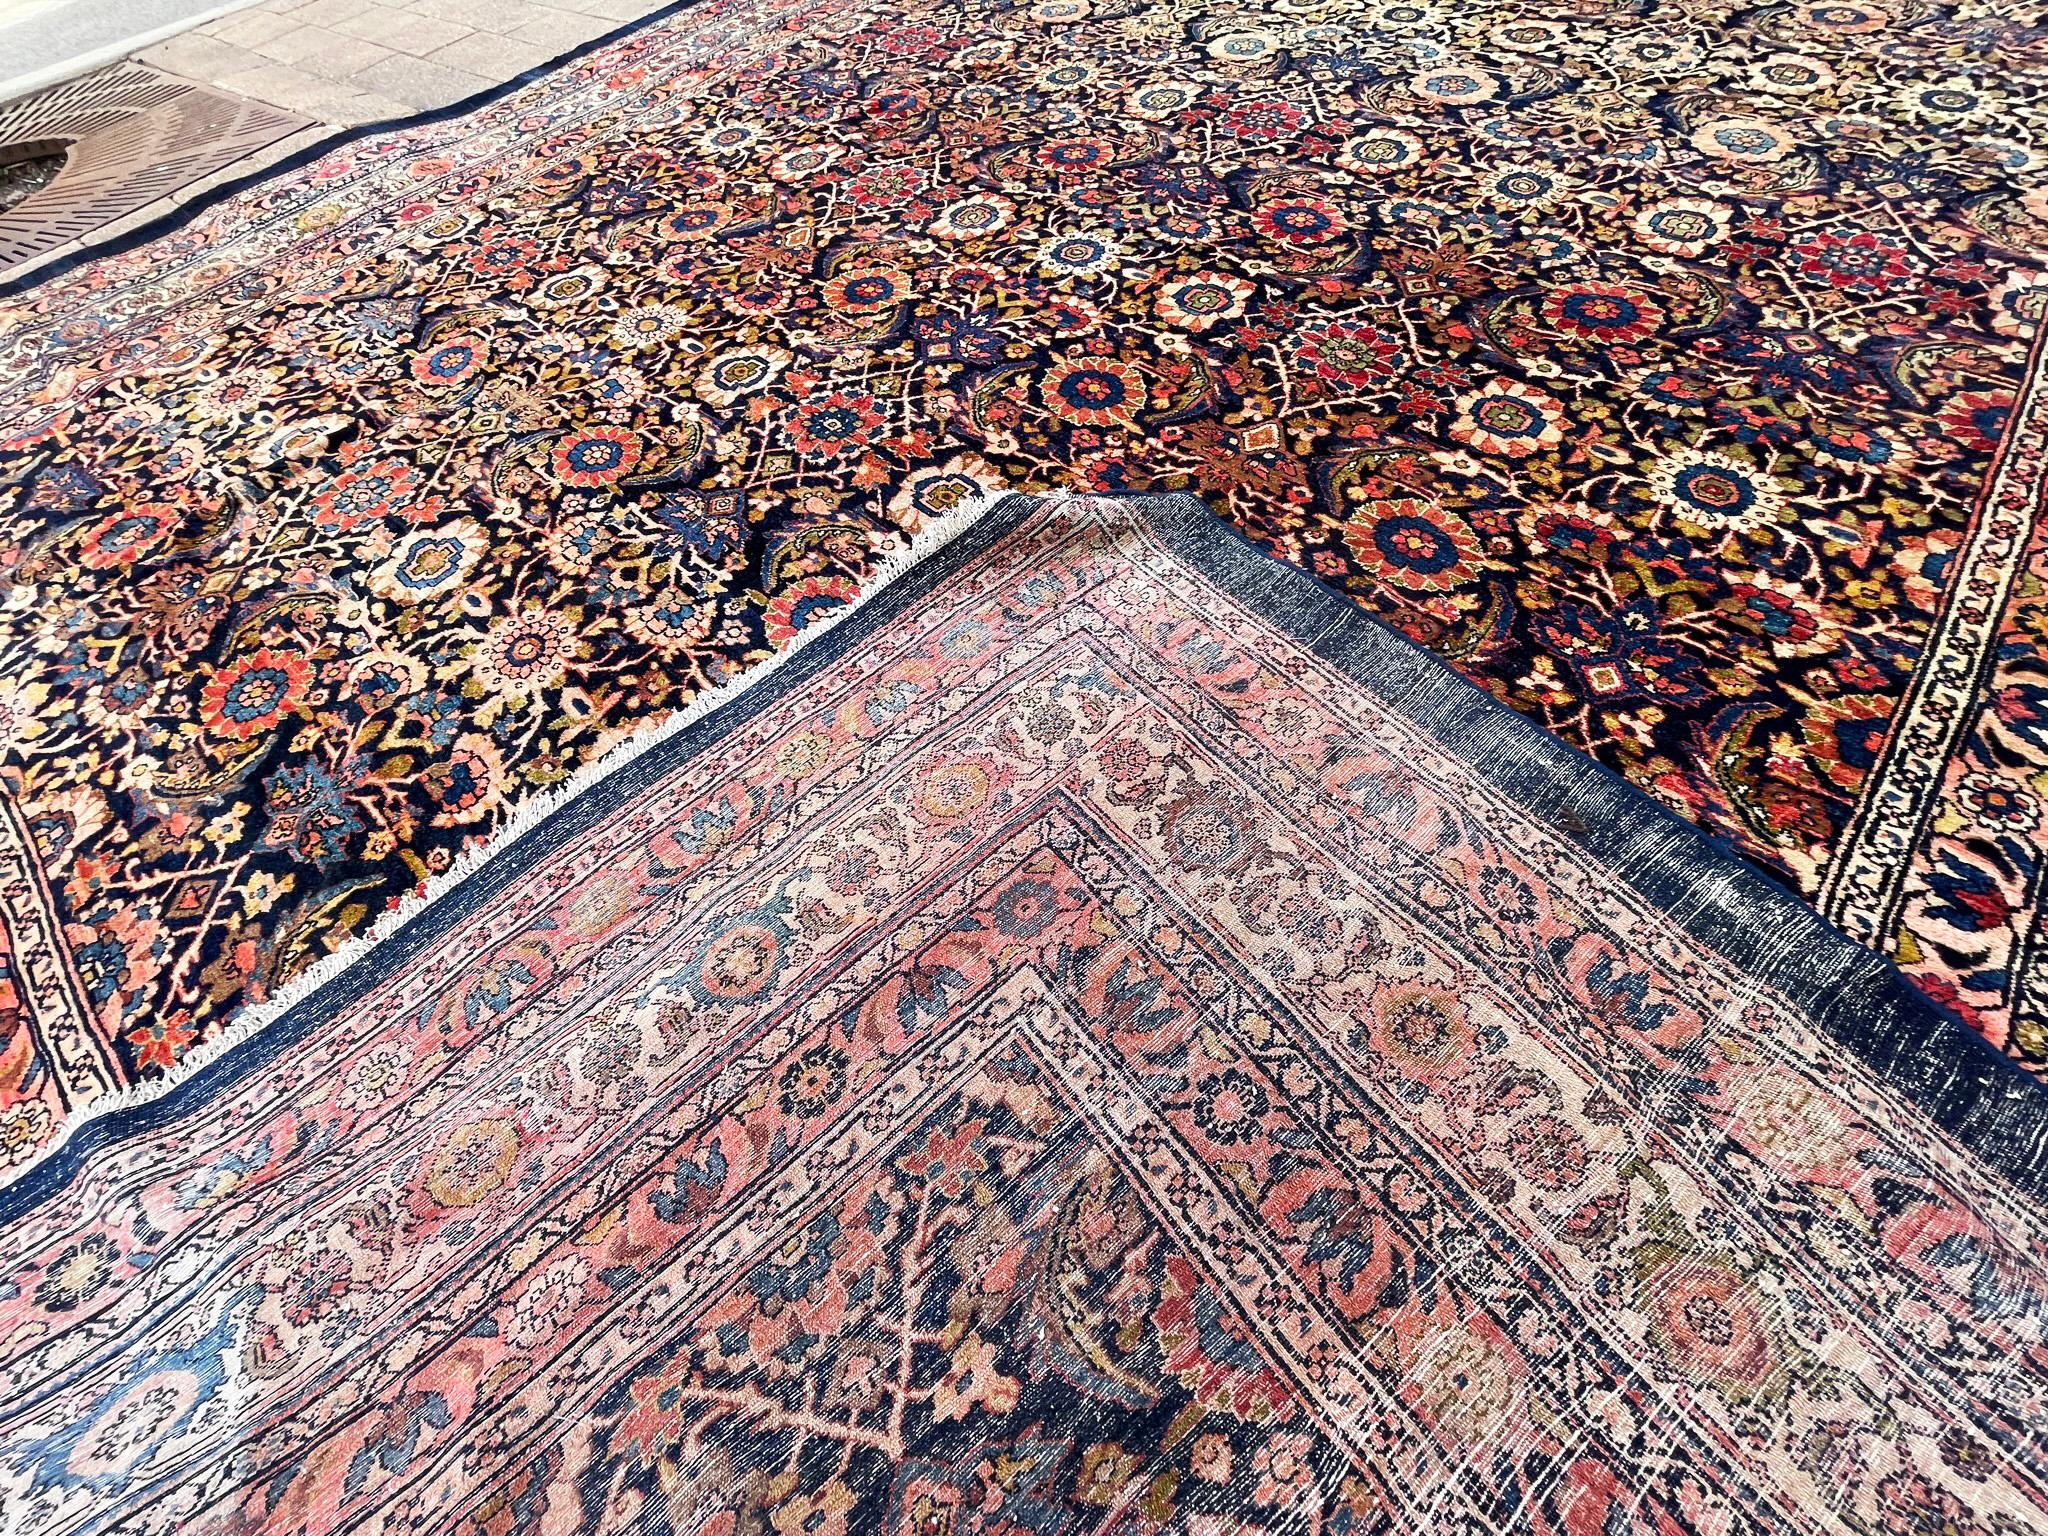 Step into the allure of history with this magnificent over-sized antique Persian Malayer carpet, measuring an impressive 11'6